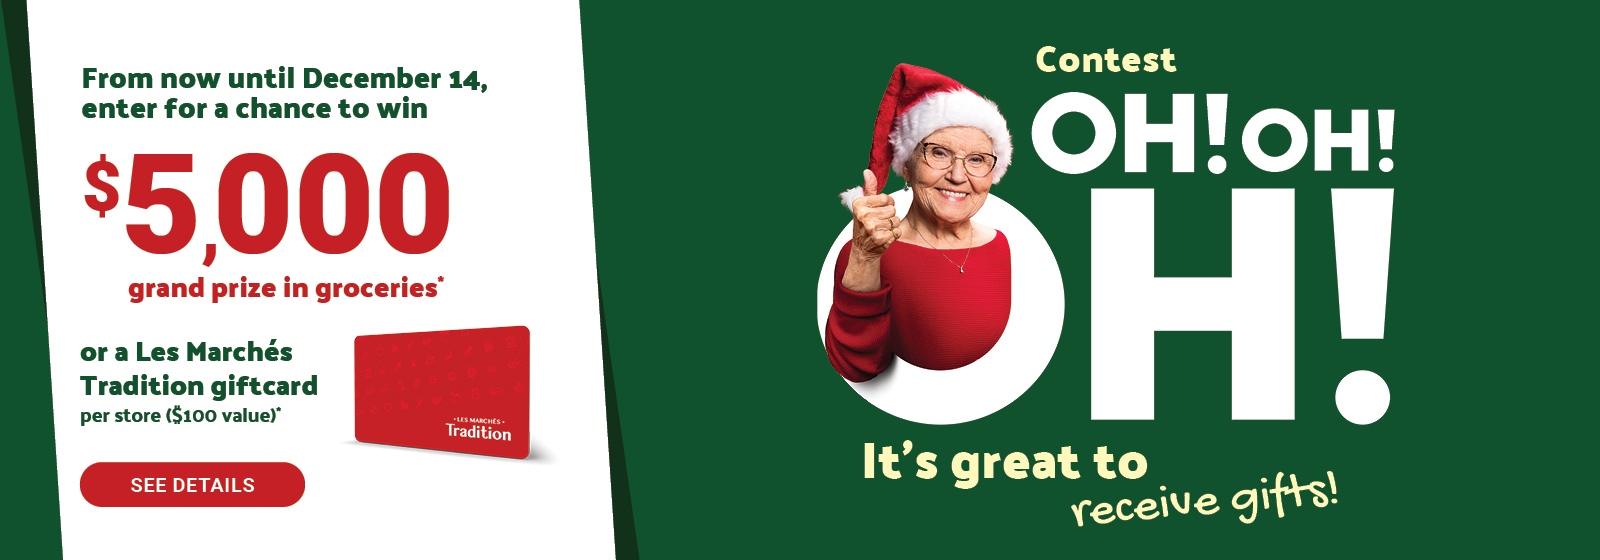 Text Reading 'Contest Oh!Oh! Oh! It's great to receive gifts! From now until December 14, enter for a chance to win $5,000 grand prize in groceries OR a Les Marchés Tradition giftcard per store ($100 value). To 'See Details', click on the button on the left.'